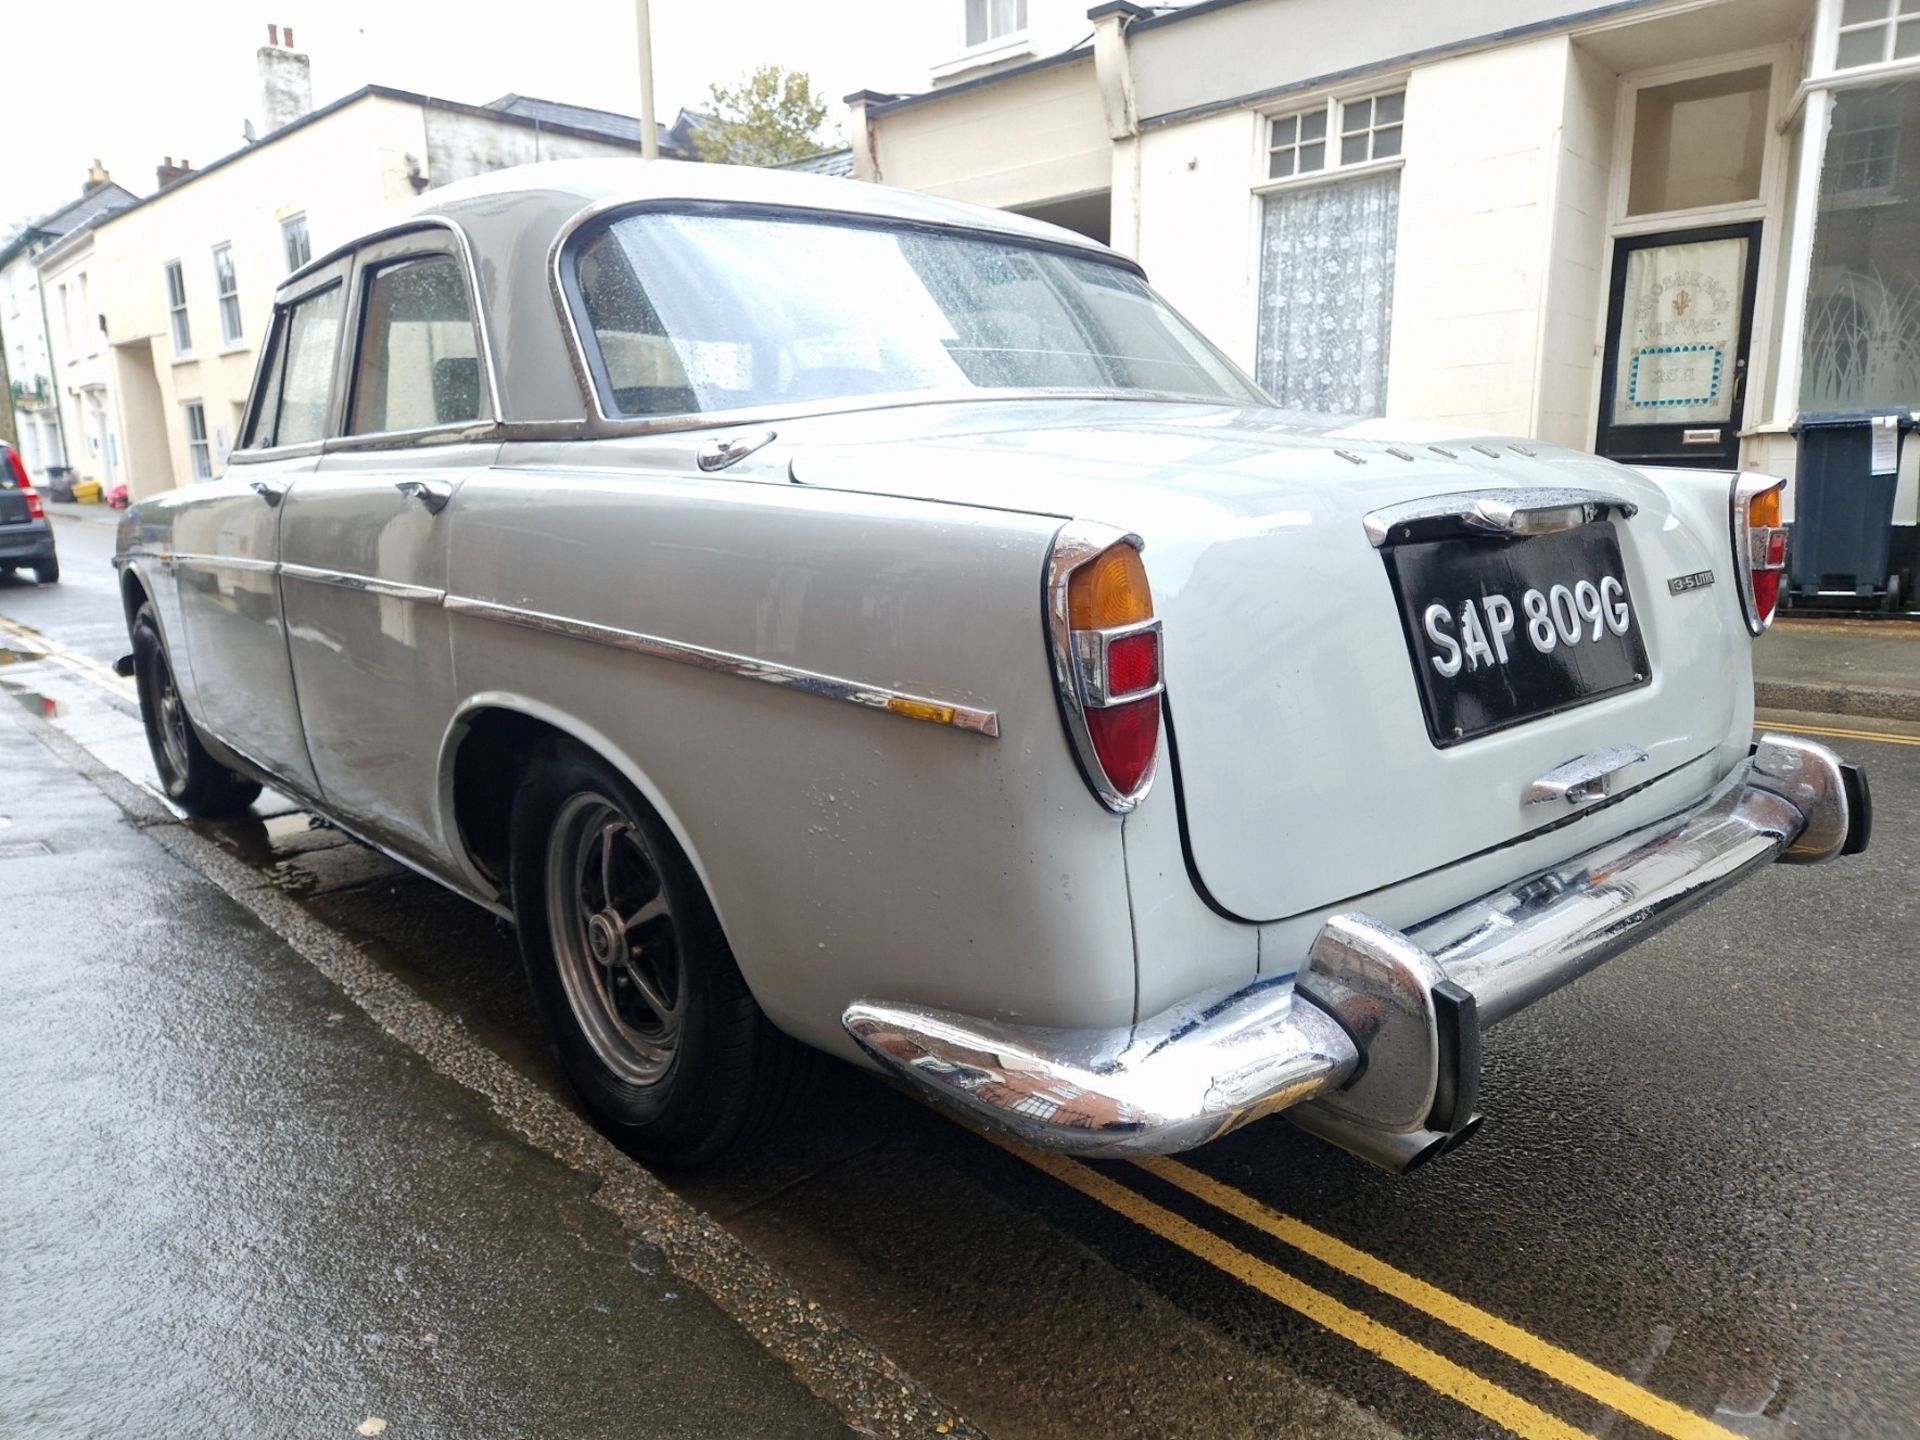 1969 Rover P5B Saloon Registration number SAP 809G Chassis number 84003266B Engine number - Image 2 of 14